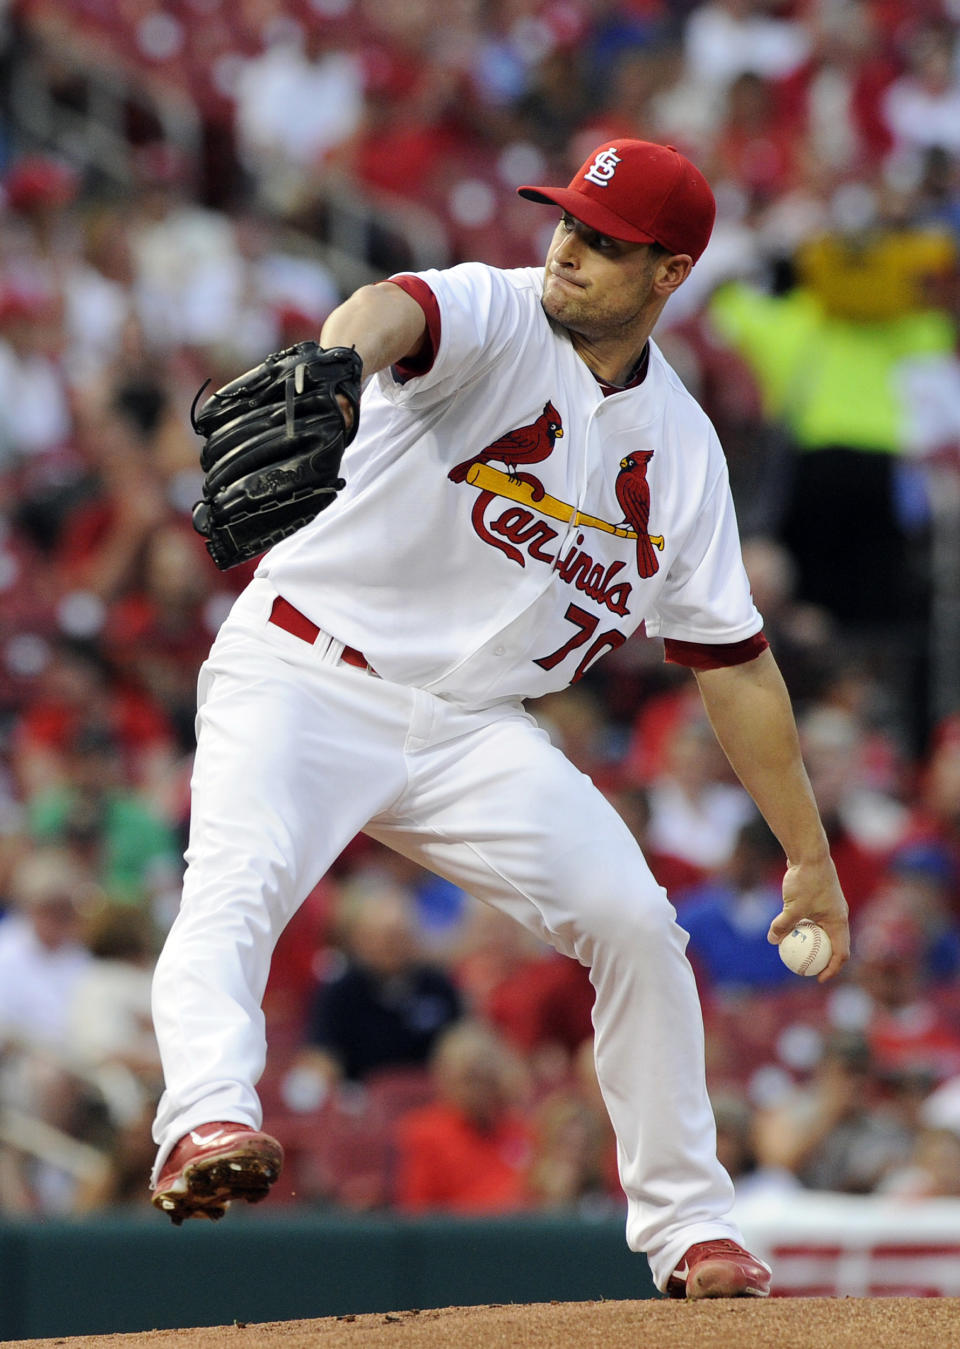 St. Louis Cardinals' starting pitcher Tyler Lyons throws against the Chicago Cubs in the first inning in a baseball game, Monday, May 12, 2014, at Busch Stadium in St. Louis. (AP Photo/Bill Boyce)